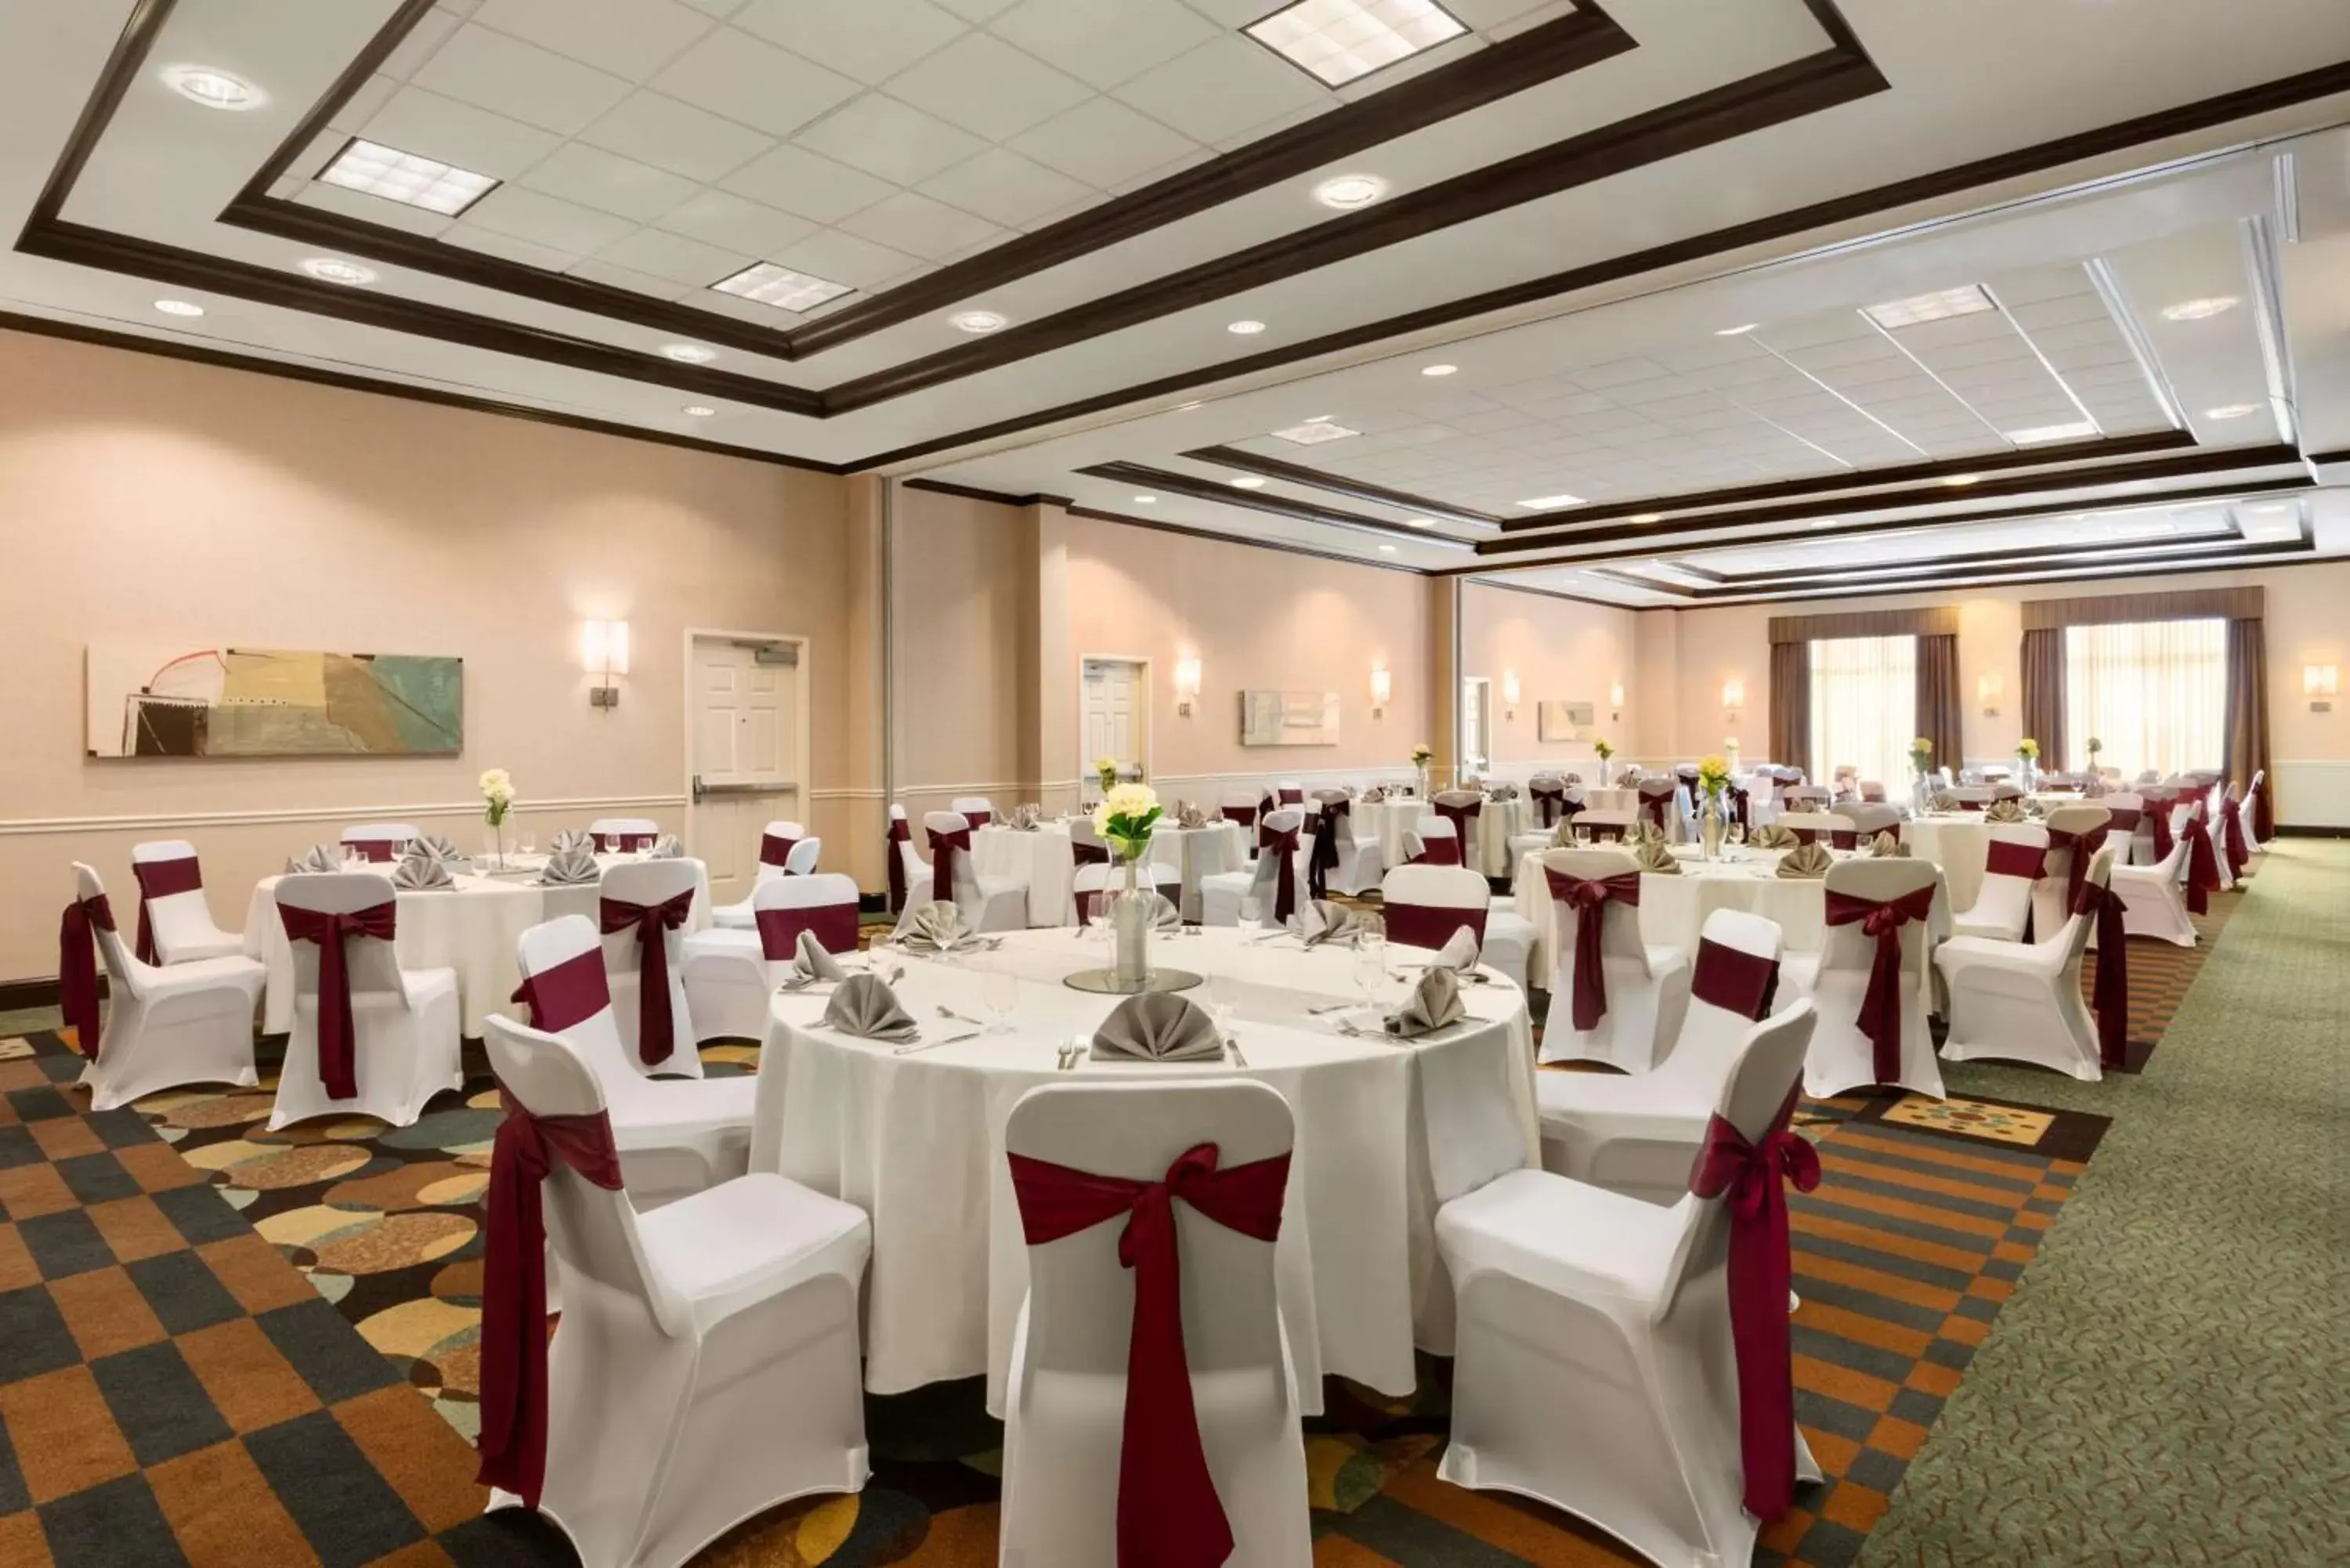 Meeting/conference room, Banquet Facilities in Hilton Garden Inn Dulles North